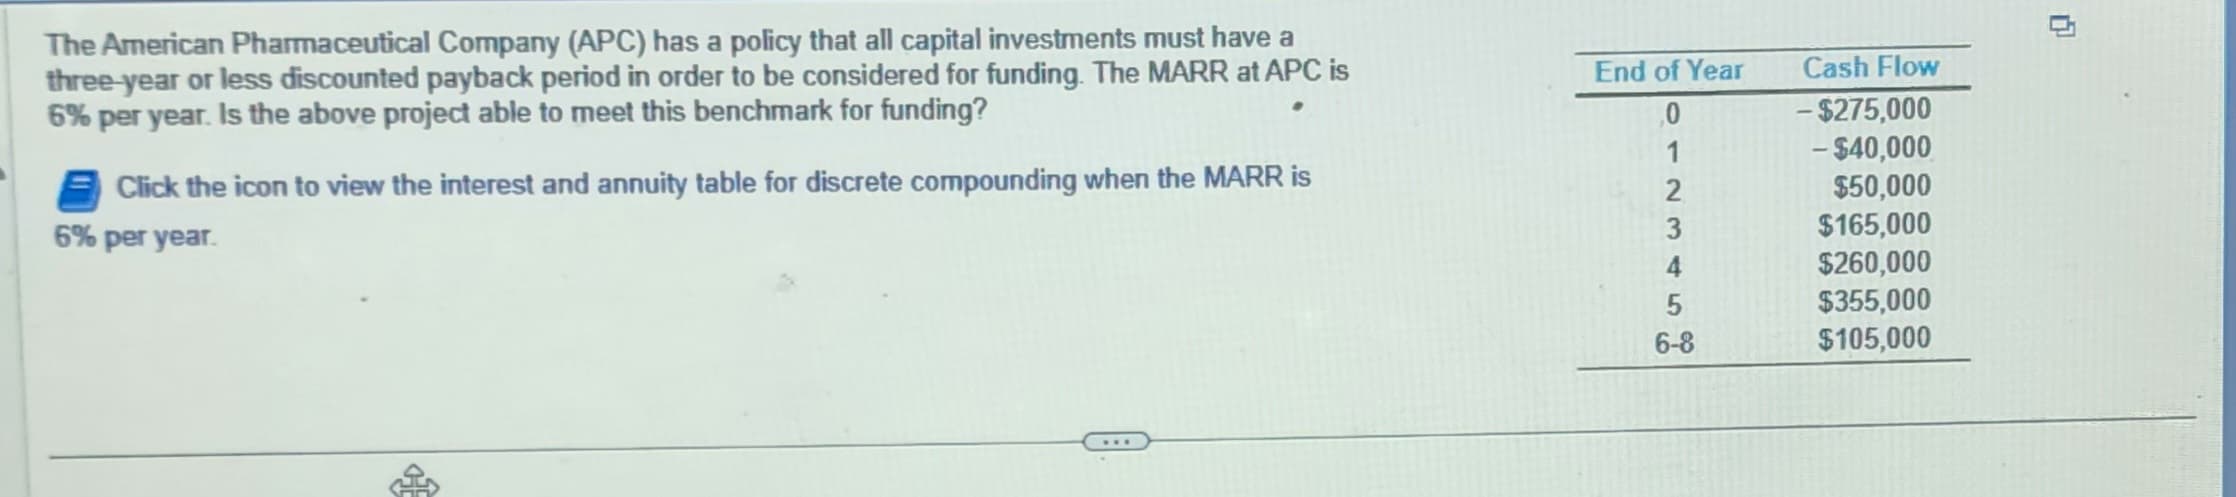 The American Pharmaceutical Company (APC) has a policy that all capital investments must have a
three-year or less discounted payback period in order to be considered for funding. The MARR at APC is
6% per year. Is the above project able to meet this benchmark for funding?
Click the icon to view the interest and annuity table for discrete compounding when the MARR is
6% per year.
End of Year
0
Cash Flow
-$275,000
1
-$40,000
2
$50,000
3
$165,000
4
$260,000
5
$355,000
6-8
$105,000